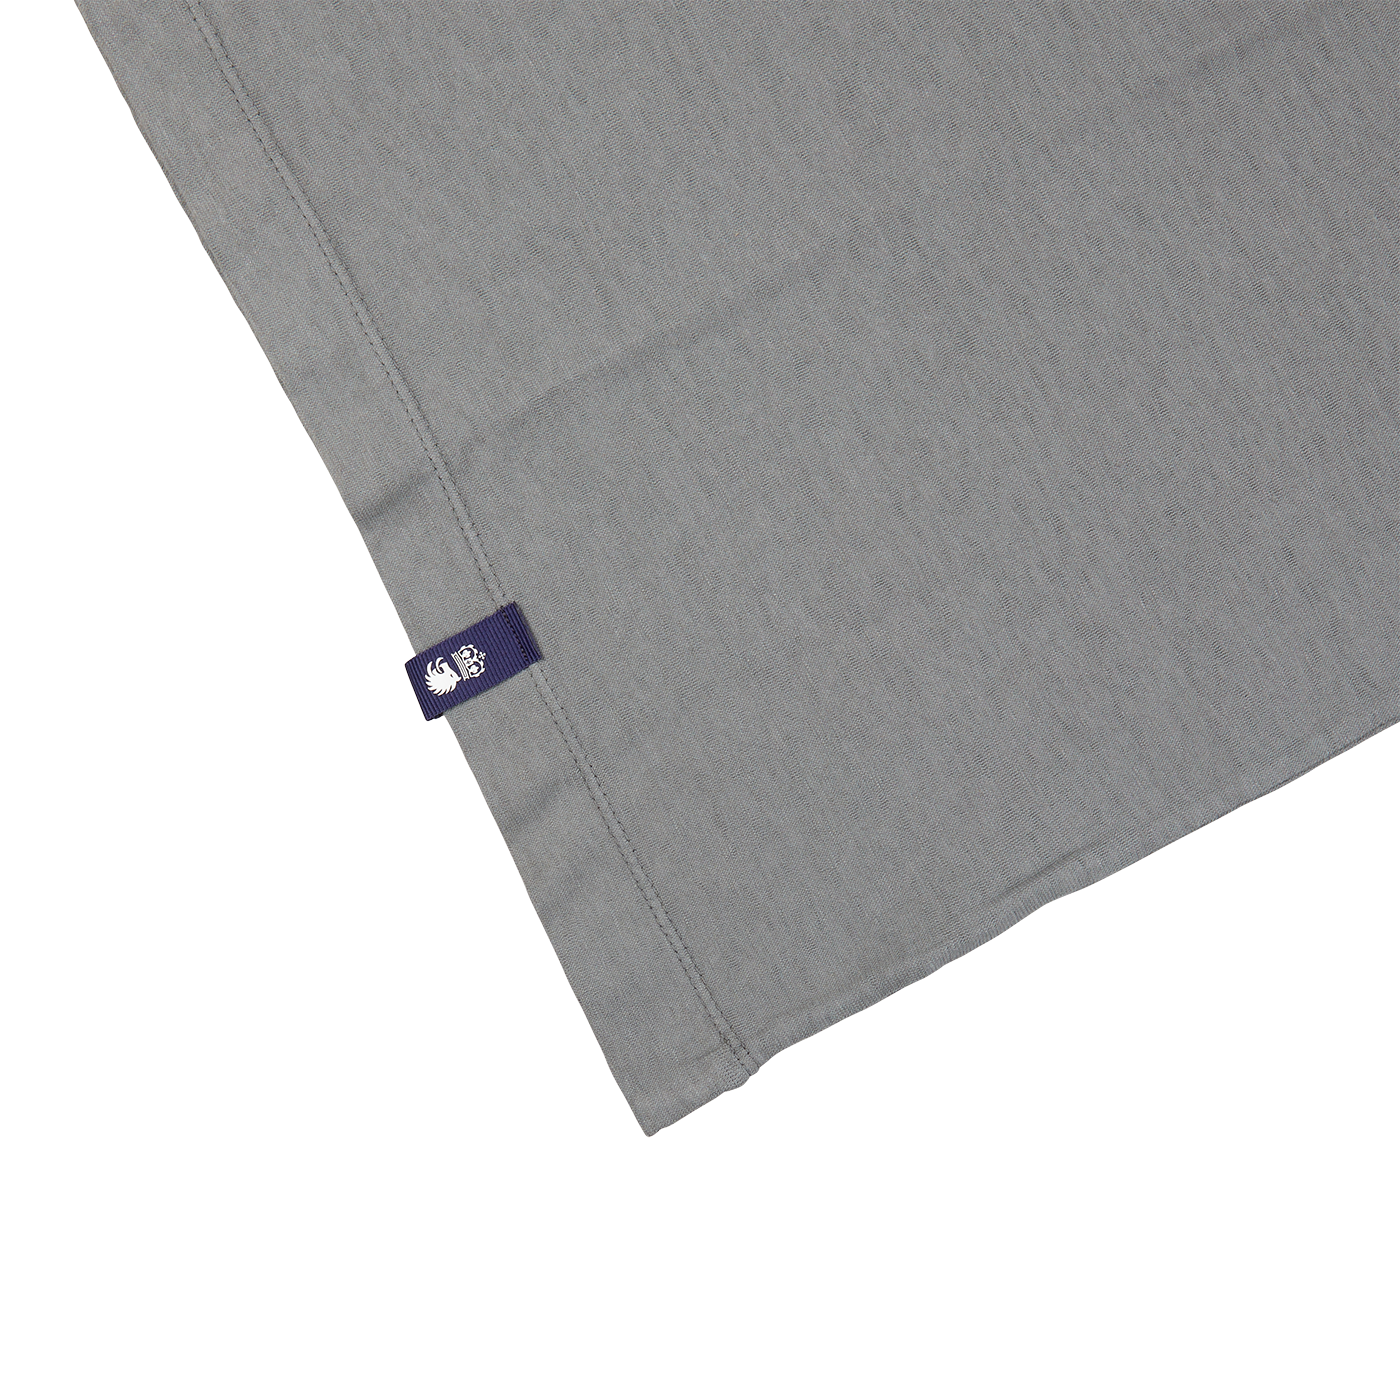 A Steel Grey Cotton Linen T-Shirt with a purple label from Italy by Drumohr.